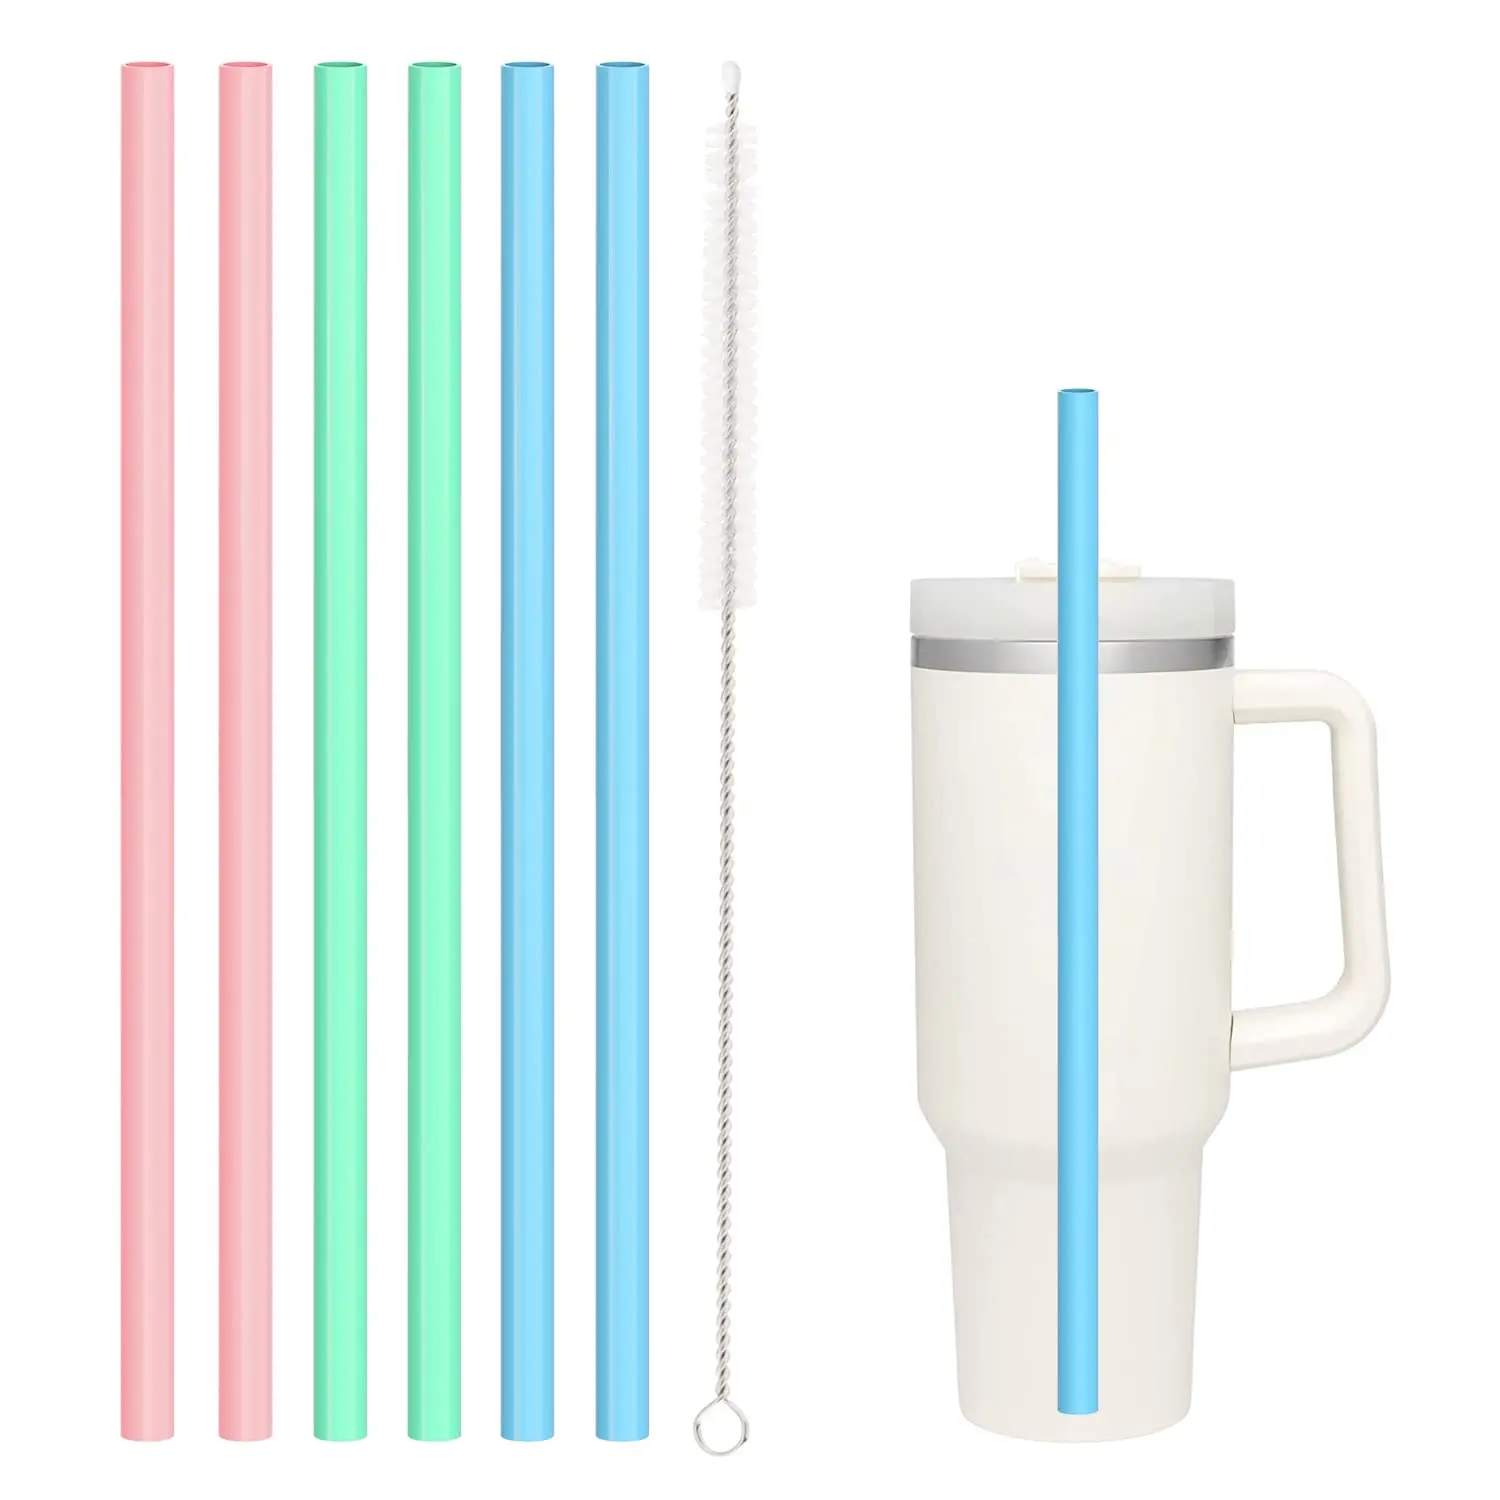 https://ae01.alicdn.com/kf/S9b9ff43cc38d42b3b92ec687c9ac31e6e/6-Pack-Multicolor-Silicone-Replacement-Straws-for-Stanley-20-30-40-oz-cup-Reusable-Long-Straw.jpg